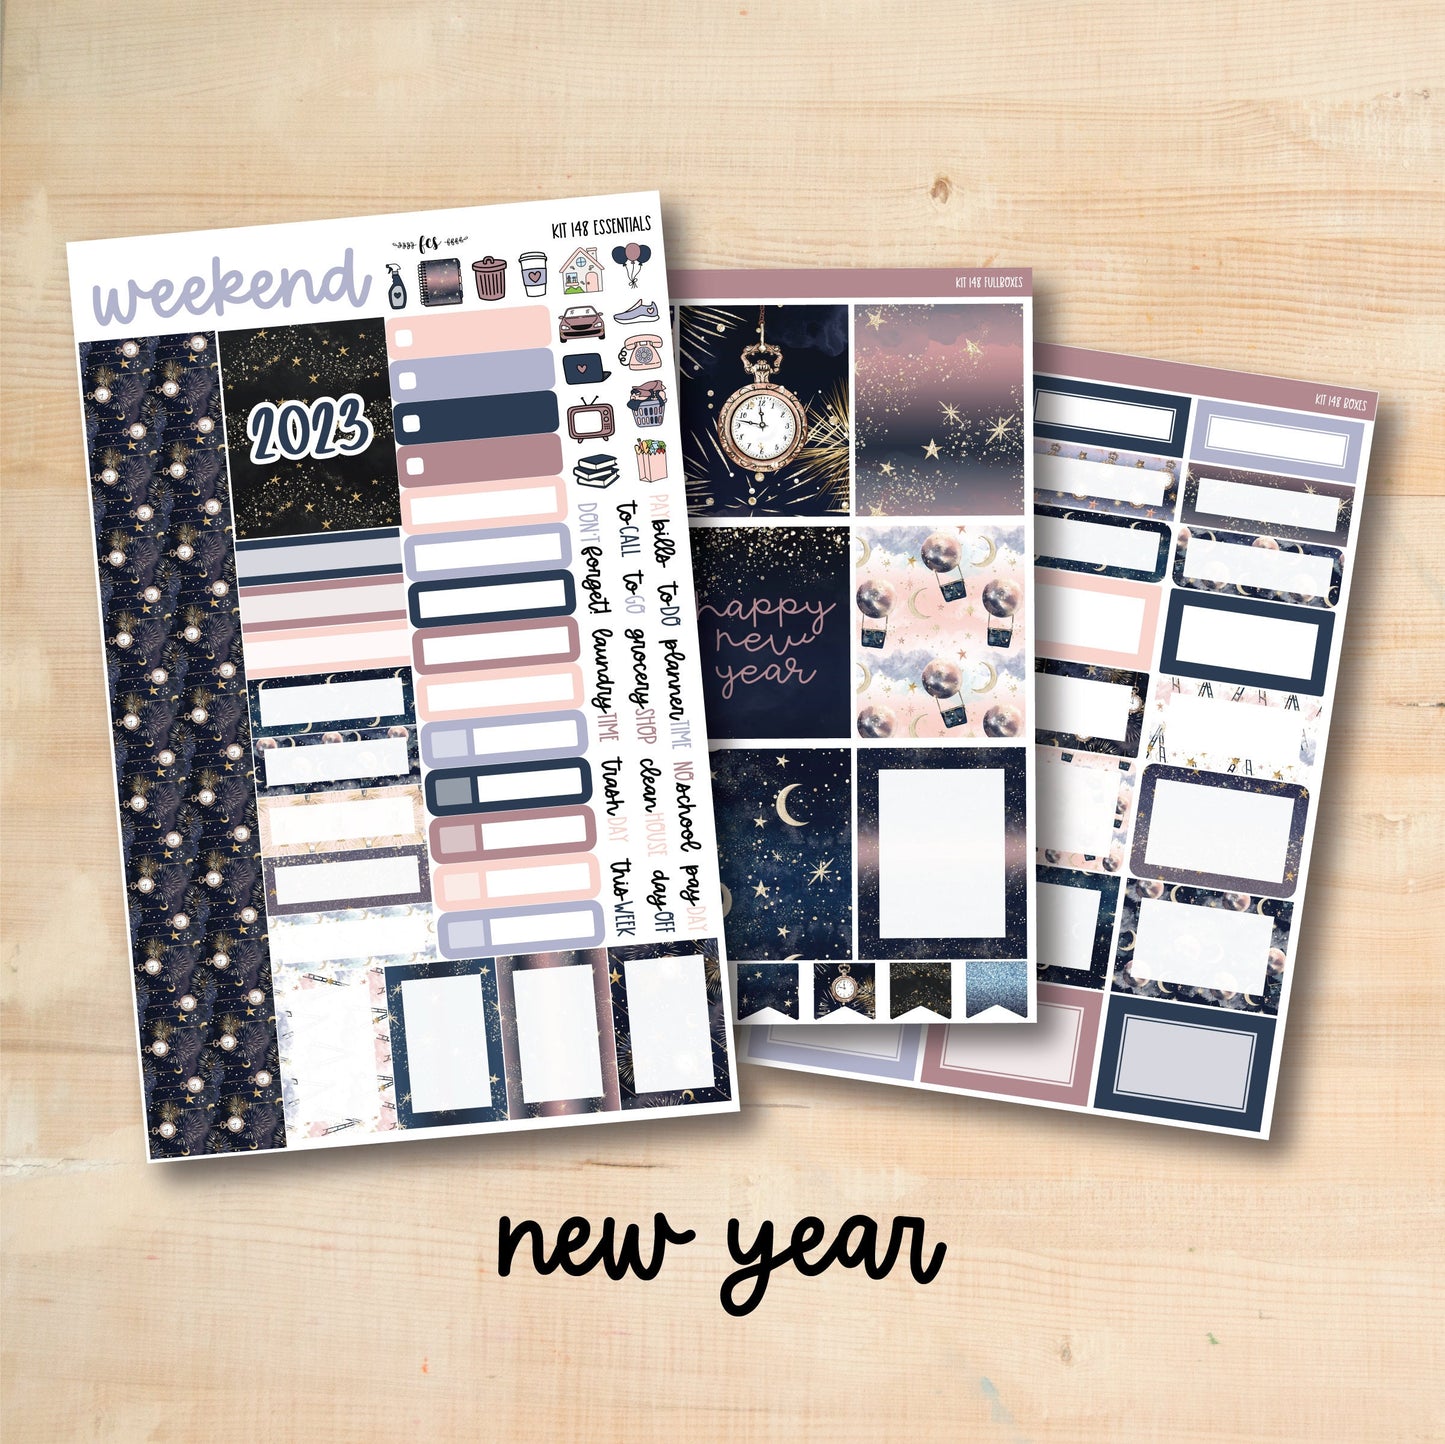 KIT-148 || NEW YEAR weekly planner kit for Erin Condren, Plum Paper, MakseLife and more!